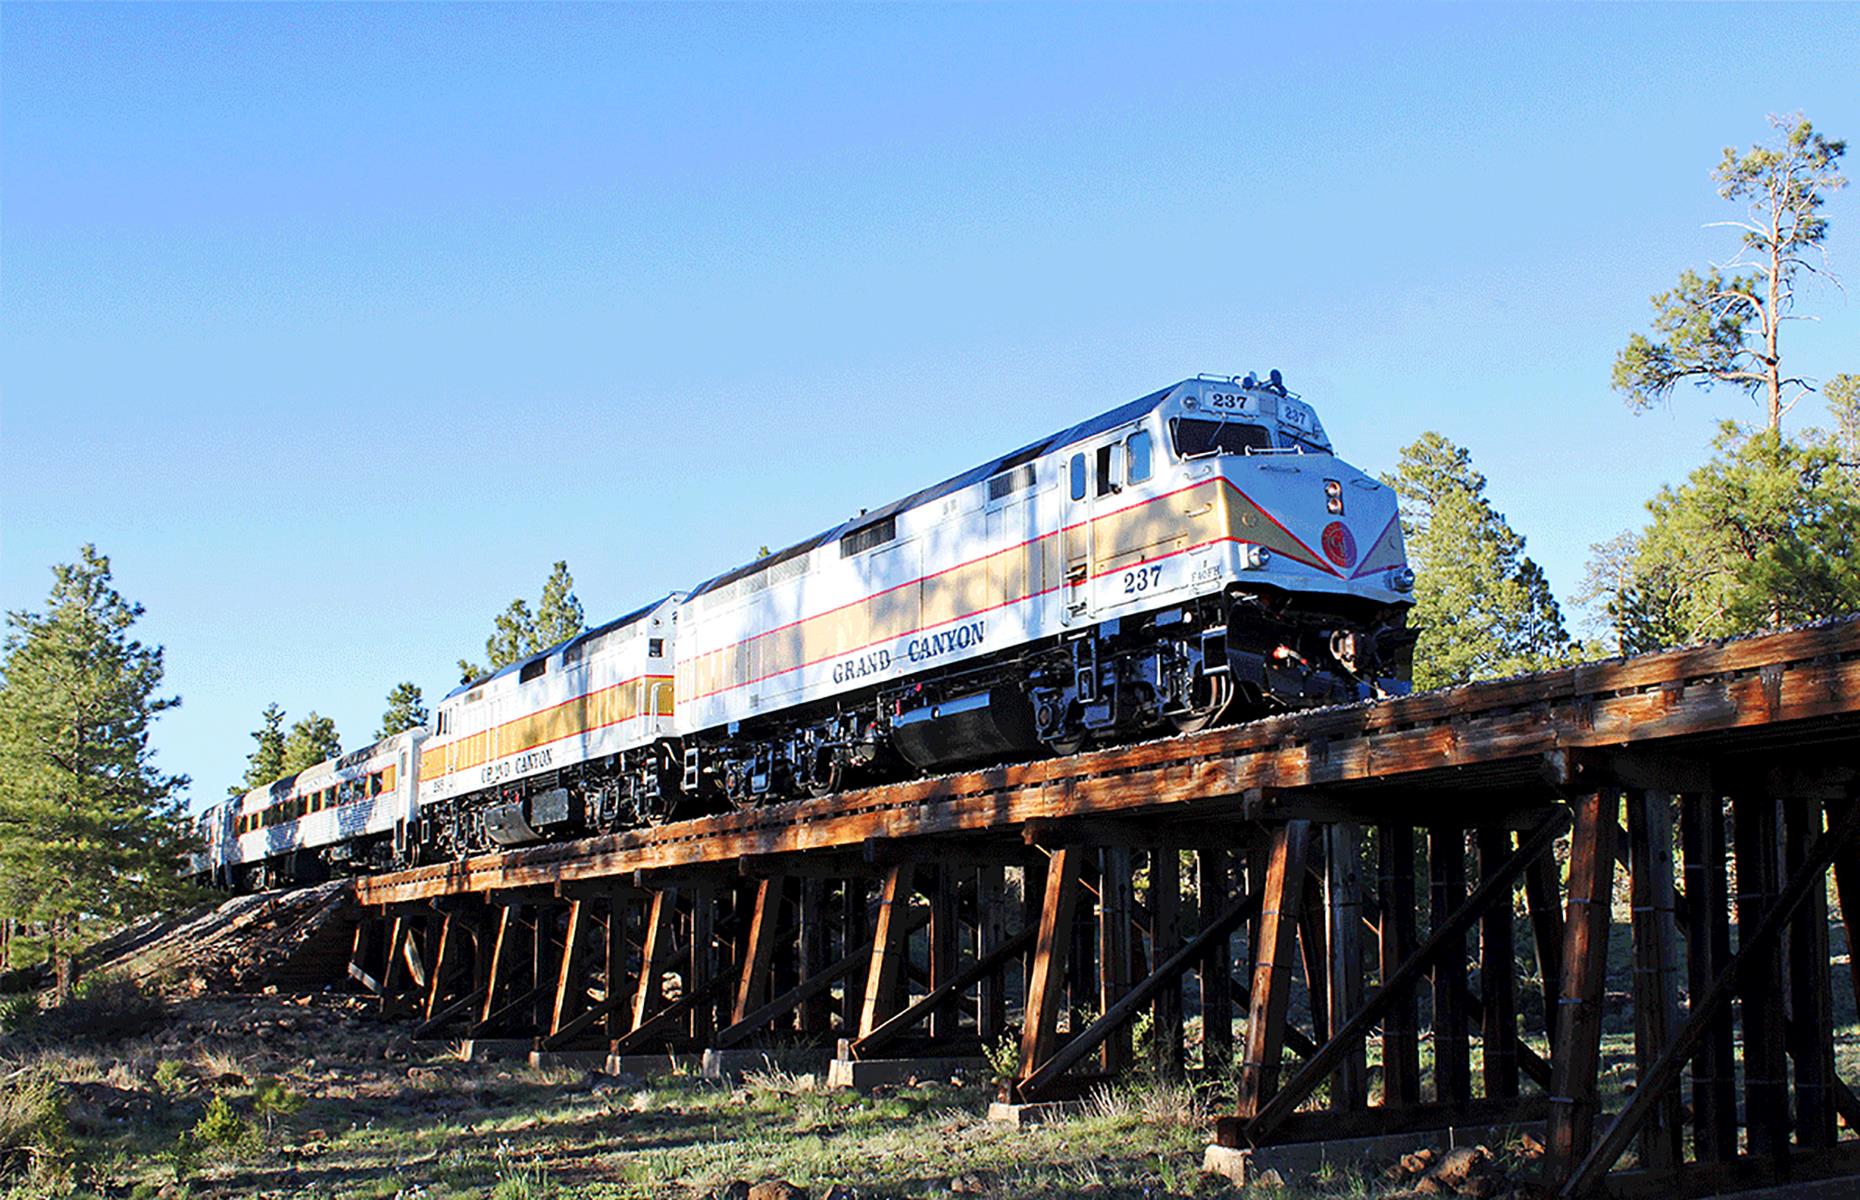 <p><a href="https://www.thetrain.com/lodging/rv-park/">This site</a> touts itself as the "Gateway to the Grand Canyon". A historic railroad even travels from the RV park to the canyon, chugging through desert and prairie, before it reaches the mighty red rocks (guests are required to wear a face covering on the train and are reminded to consult <a href="https://www.nps.gov/grca/index.htm">the NPS website</a> for updates before visiting the canyon). Back at the park, there are full hook-ups and Wi-Fi, but at present the pet resort, pool and firepit are closed. <a href="https://www.thetrain.com/lodging/rv-park/">Check the website</a> for more details before your stay. </p>